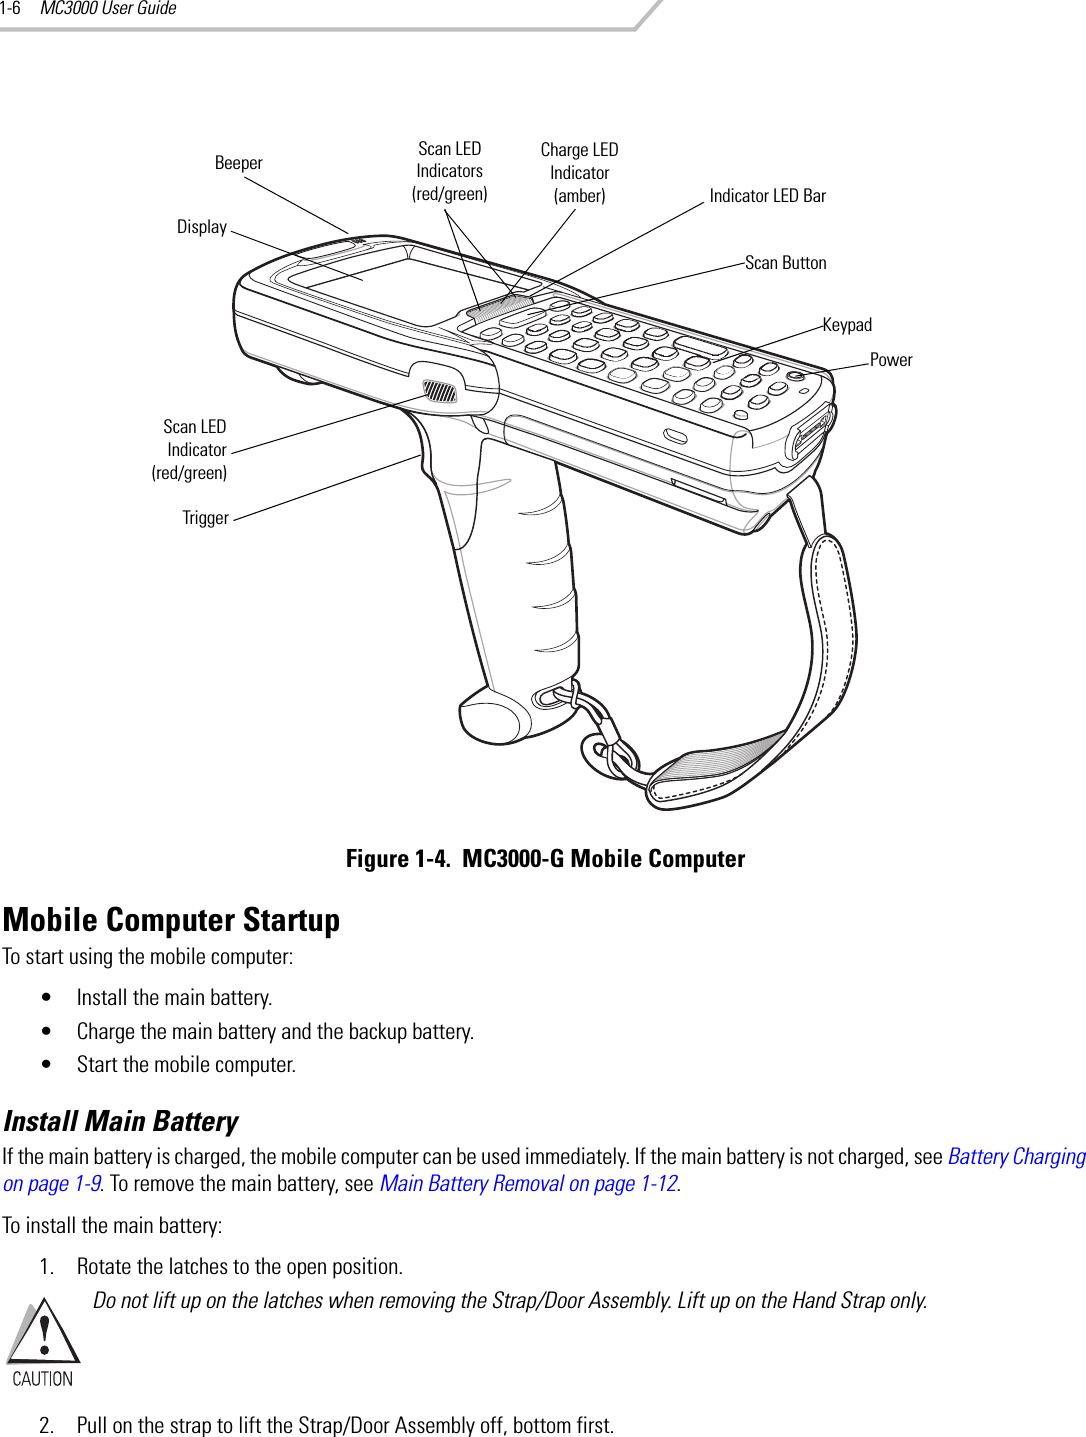 MC3000 User Guide1-6Figure 1-4.  MC3000-G Mobile ComputerMobile Computer StartupTo start using the mobile computer:• Install the main battery. • Charge the main battery and the backup battery.• Start the mobile computer.Install Main BatteryIf the main battery is charged, the mobile computer can be used immediately. If the main battery is not charged, see Battery Charging on page 1-9. To remove the main battery, see Main Battery Removal on page 1-12.To install the main battery:1. Rotate the latches to the open position.Do not lift up on the latches when removing the Strap/Door Assembly. Lift up on the Hand Strap only. 2. Pull on the strap to lift the Strap/Door Assembly off, bottom first.KeypadIndicator LED BarDisplayPowerScan ButtonBeeperTriggerScan LED Indicators (red/green)Charge LED Indicator (amber)Scan LEDIndicator(red/green)